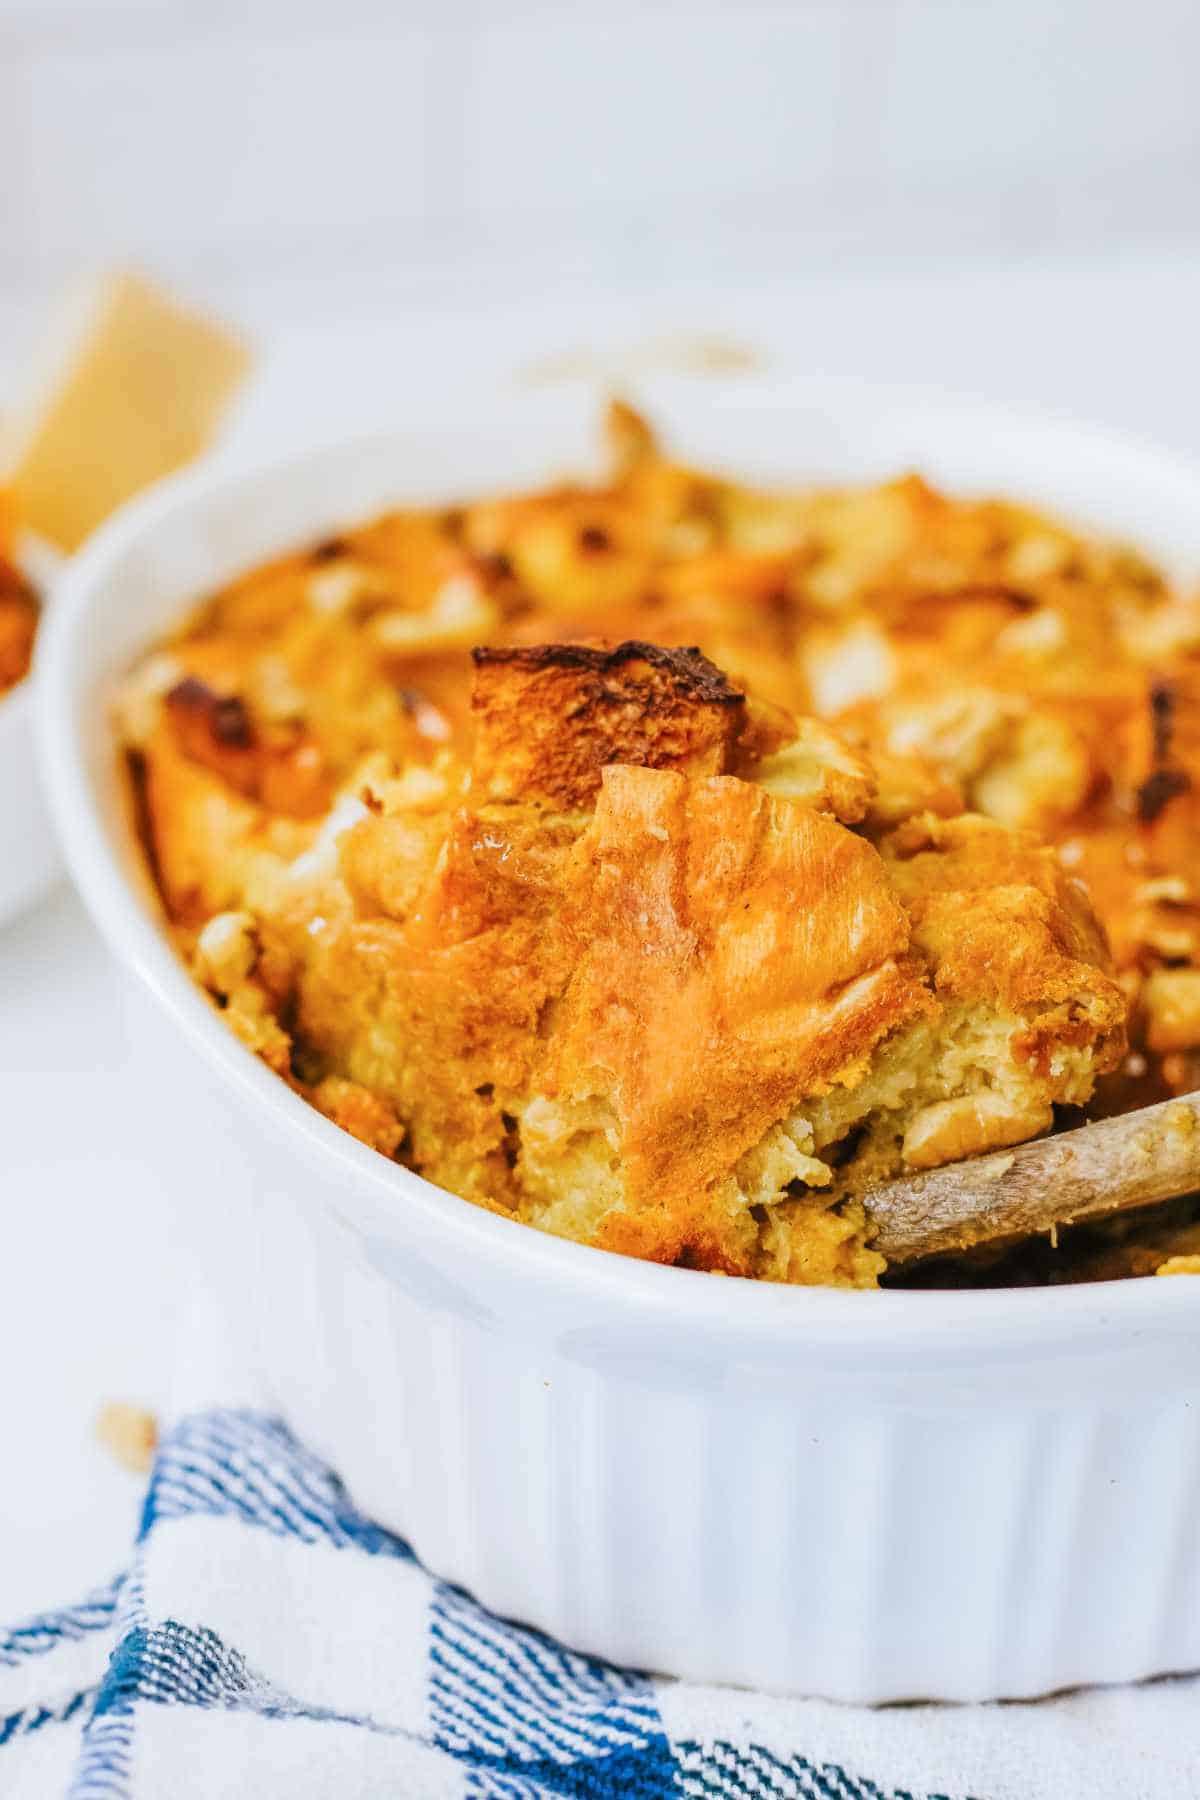 wooden scoop dishing up a serving from baked pumpkin bread pudding with nuts scattered on top in an oval white deep dish casserole.